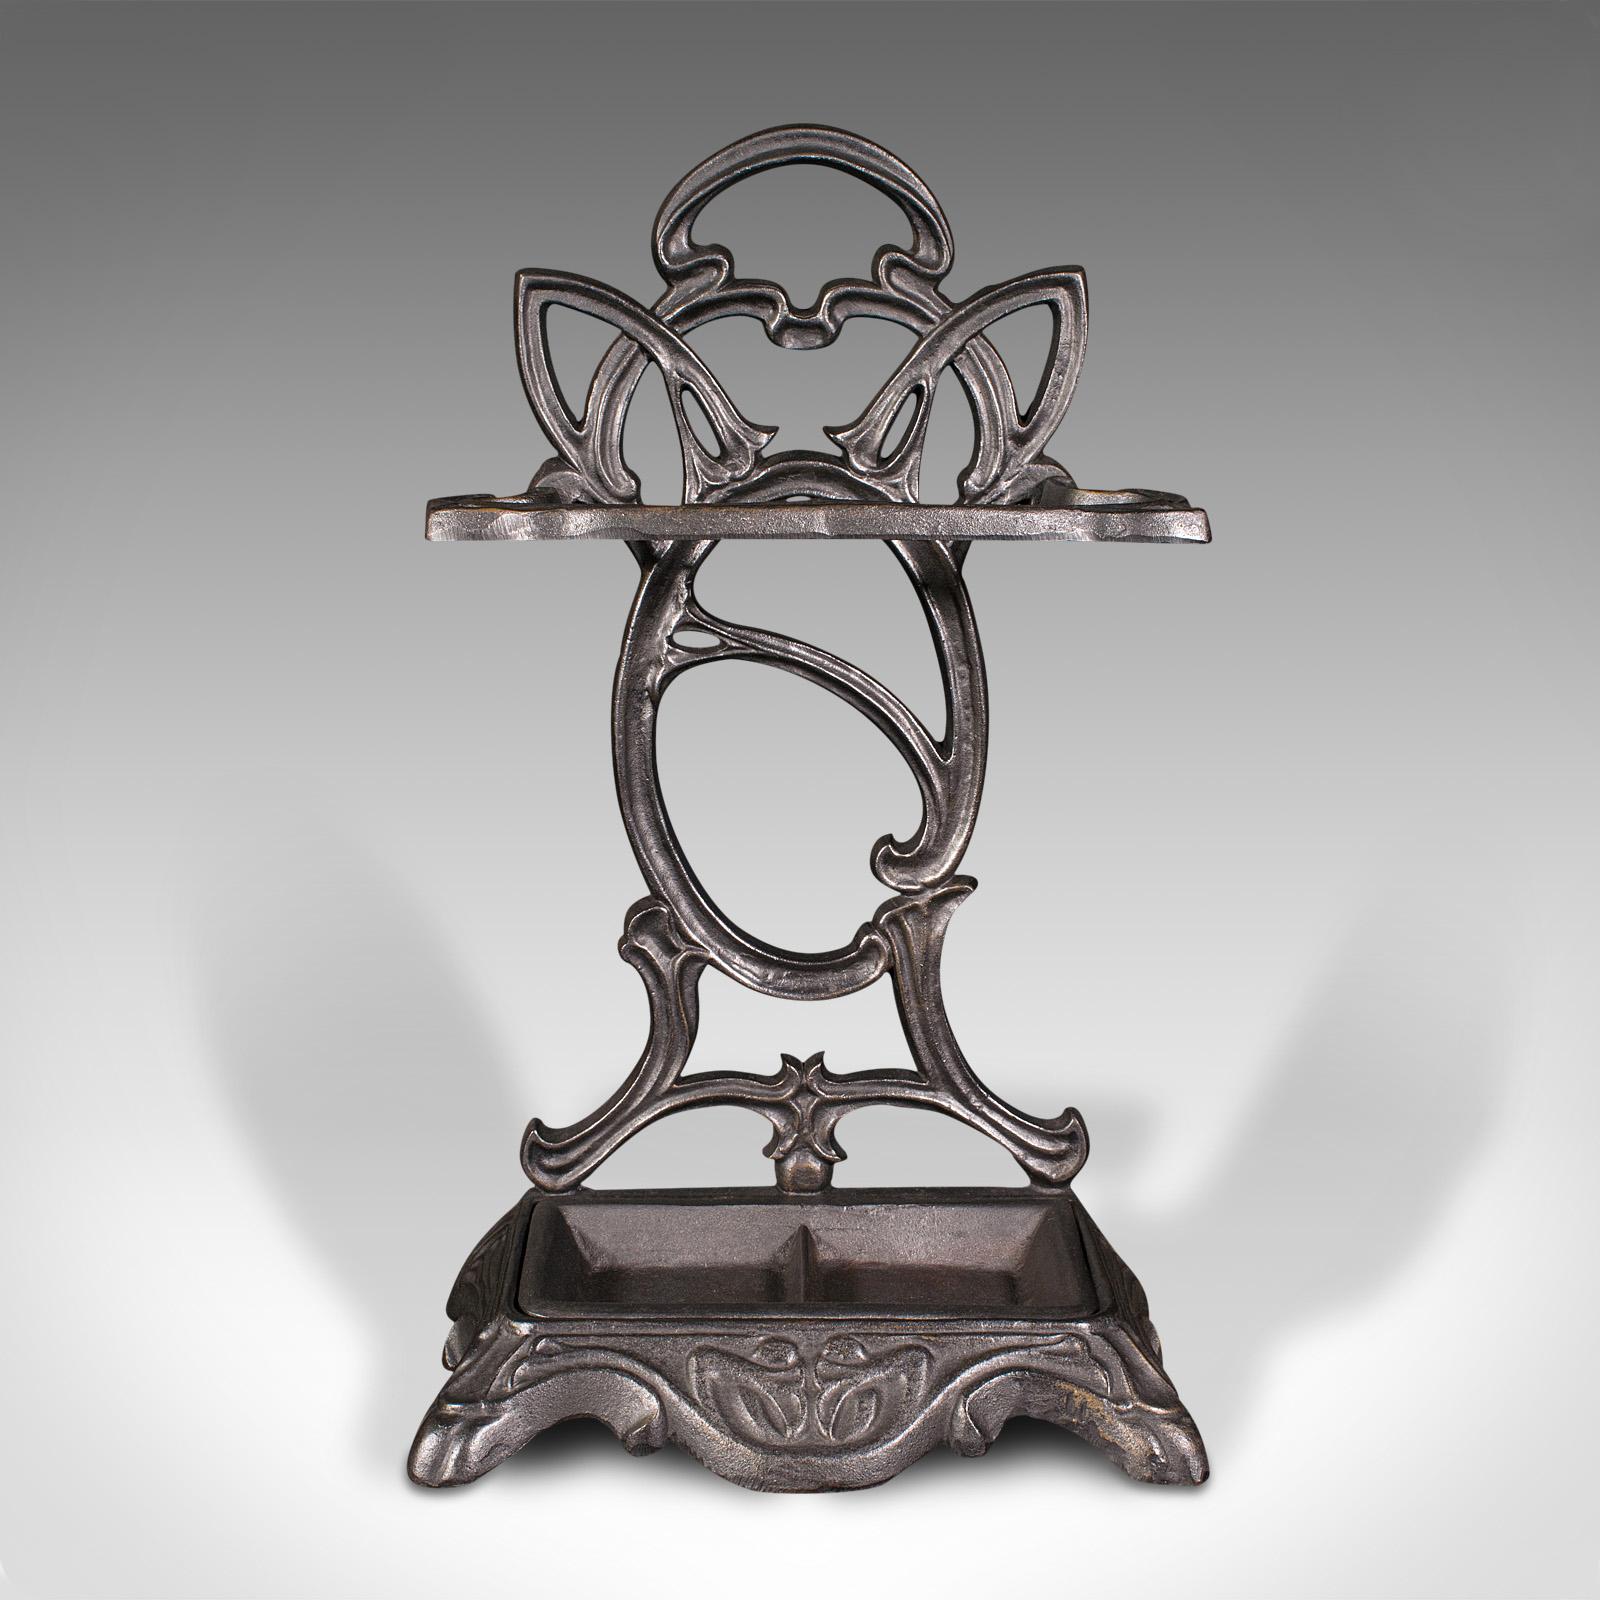 This is a vintage hallway stick stand. An English, cast iron umbrella rack displaying Art Nouveau revival taste, dating to the mid 20th century, circa 1960.

Attractive mid-century stand with appealing Victorian Art Nouveau overtones
Displays a